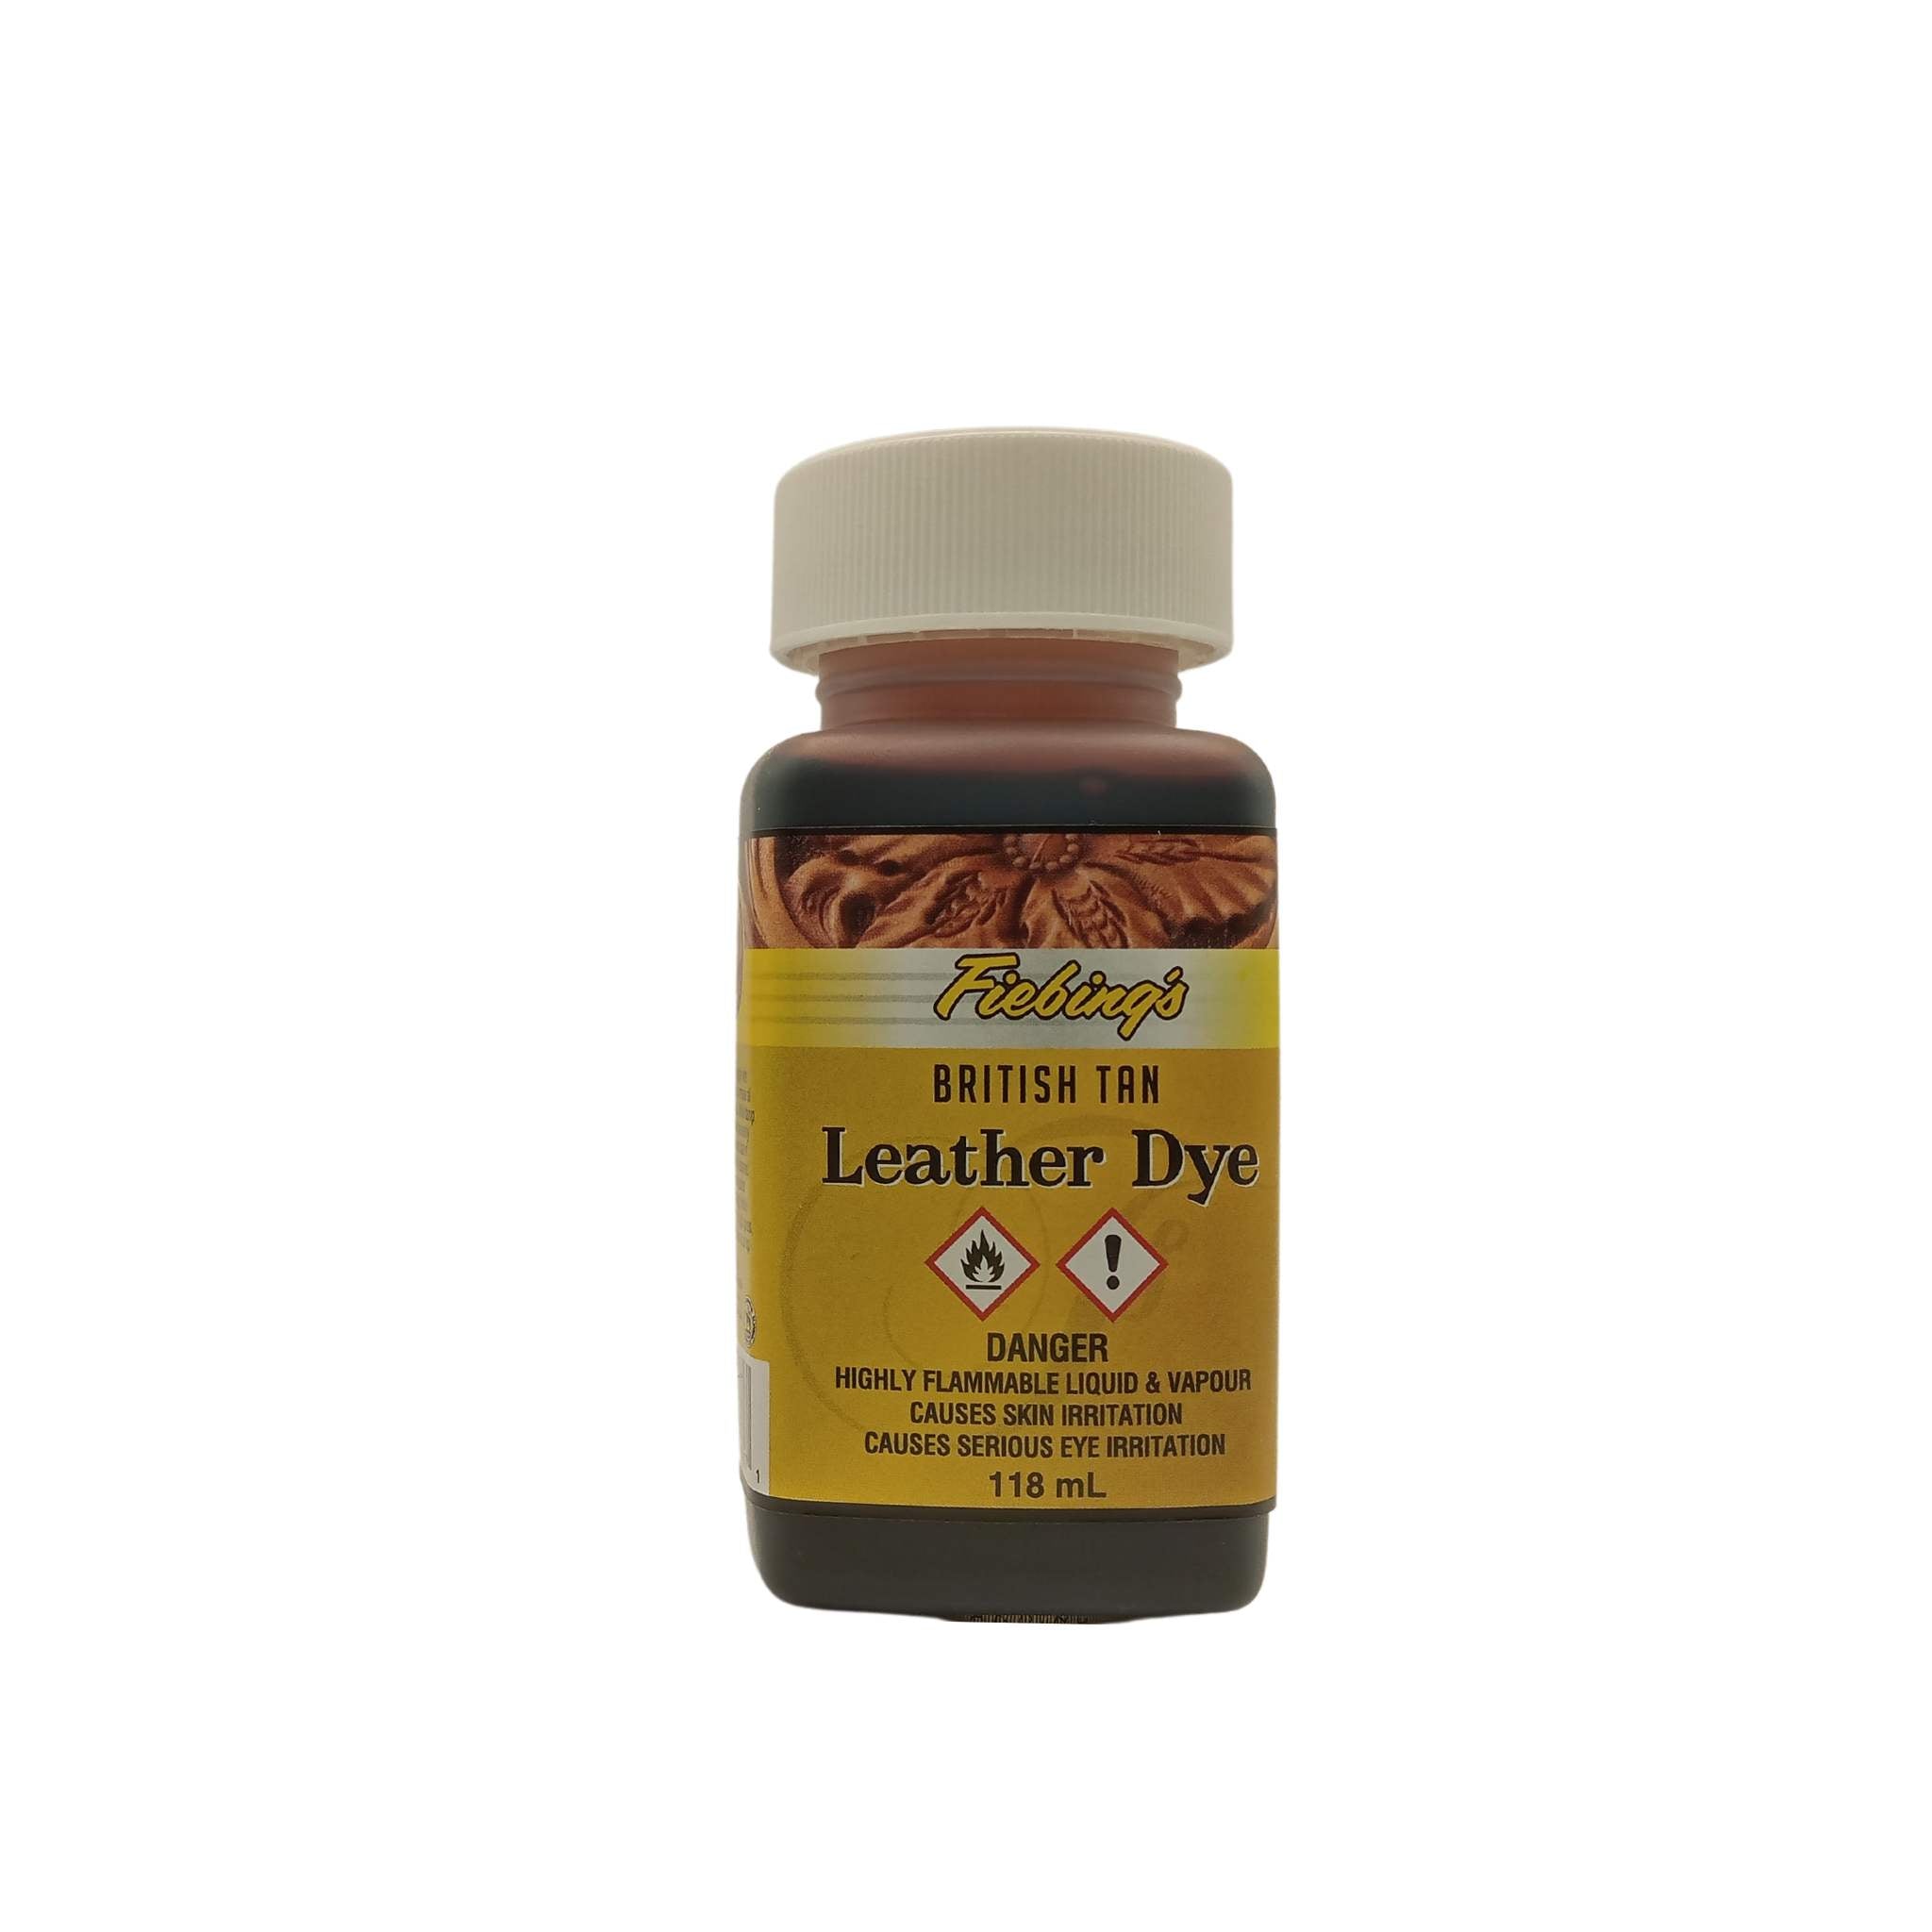 Dye your leathercraft projects with this Fiebing's solvent based leather dye - British Tan